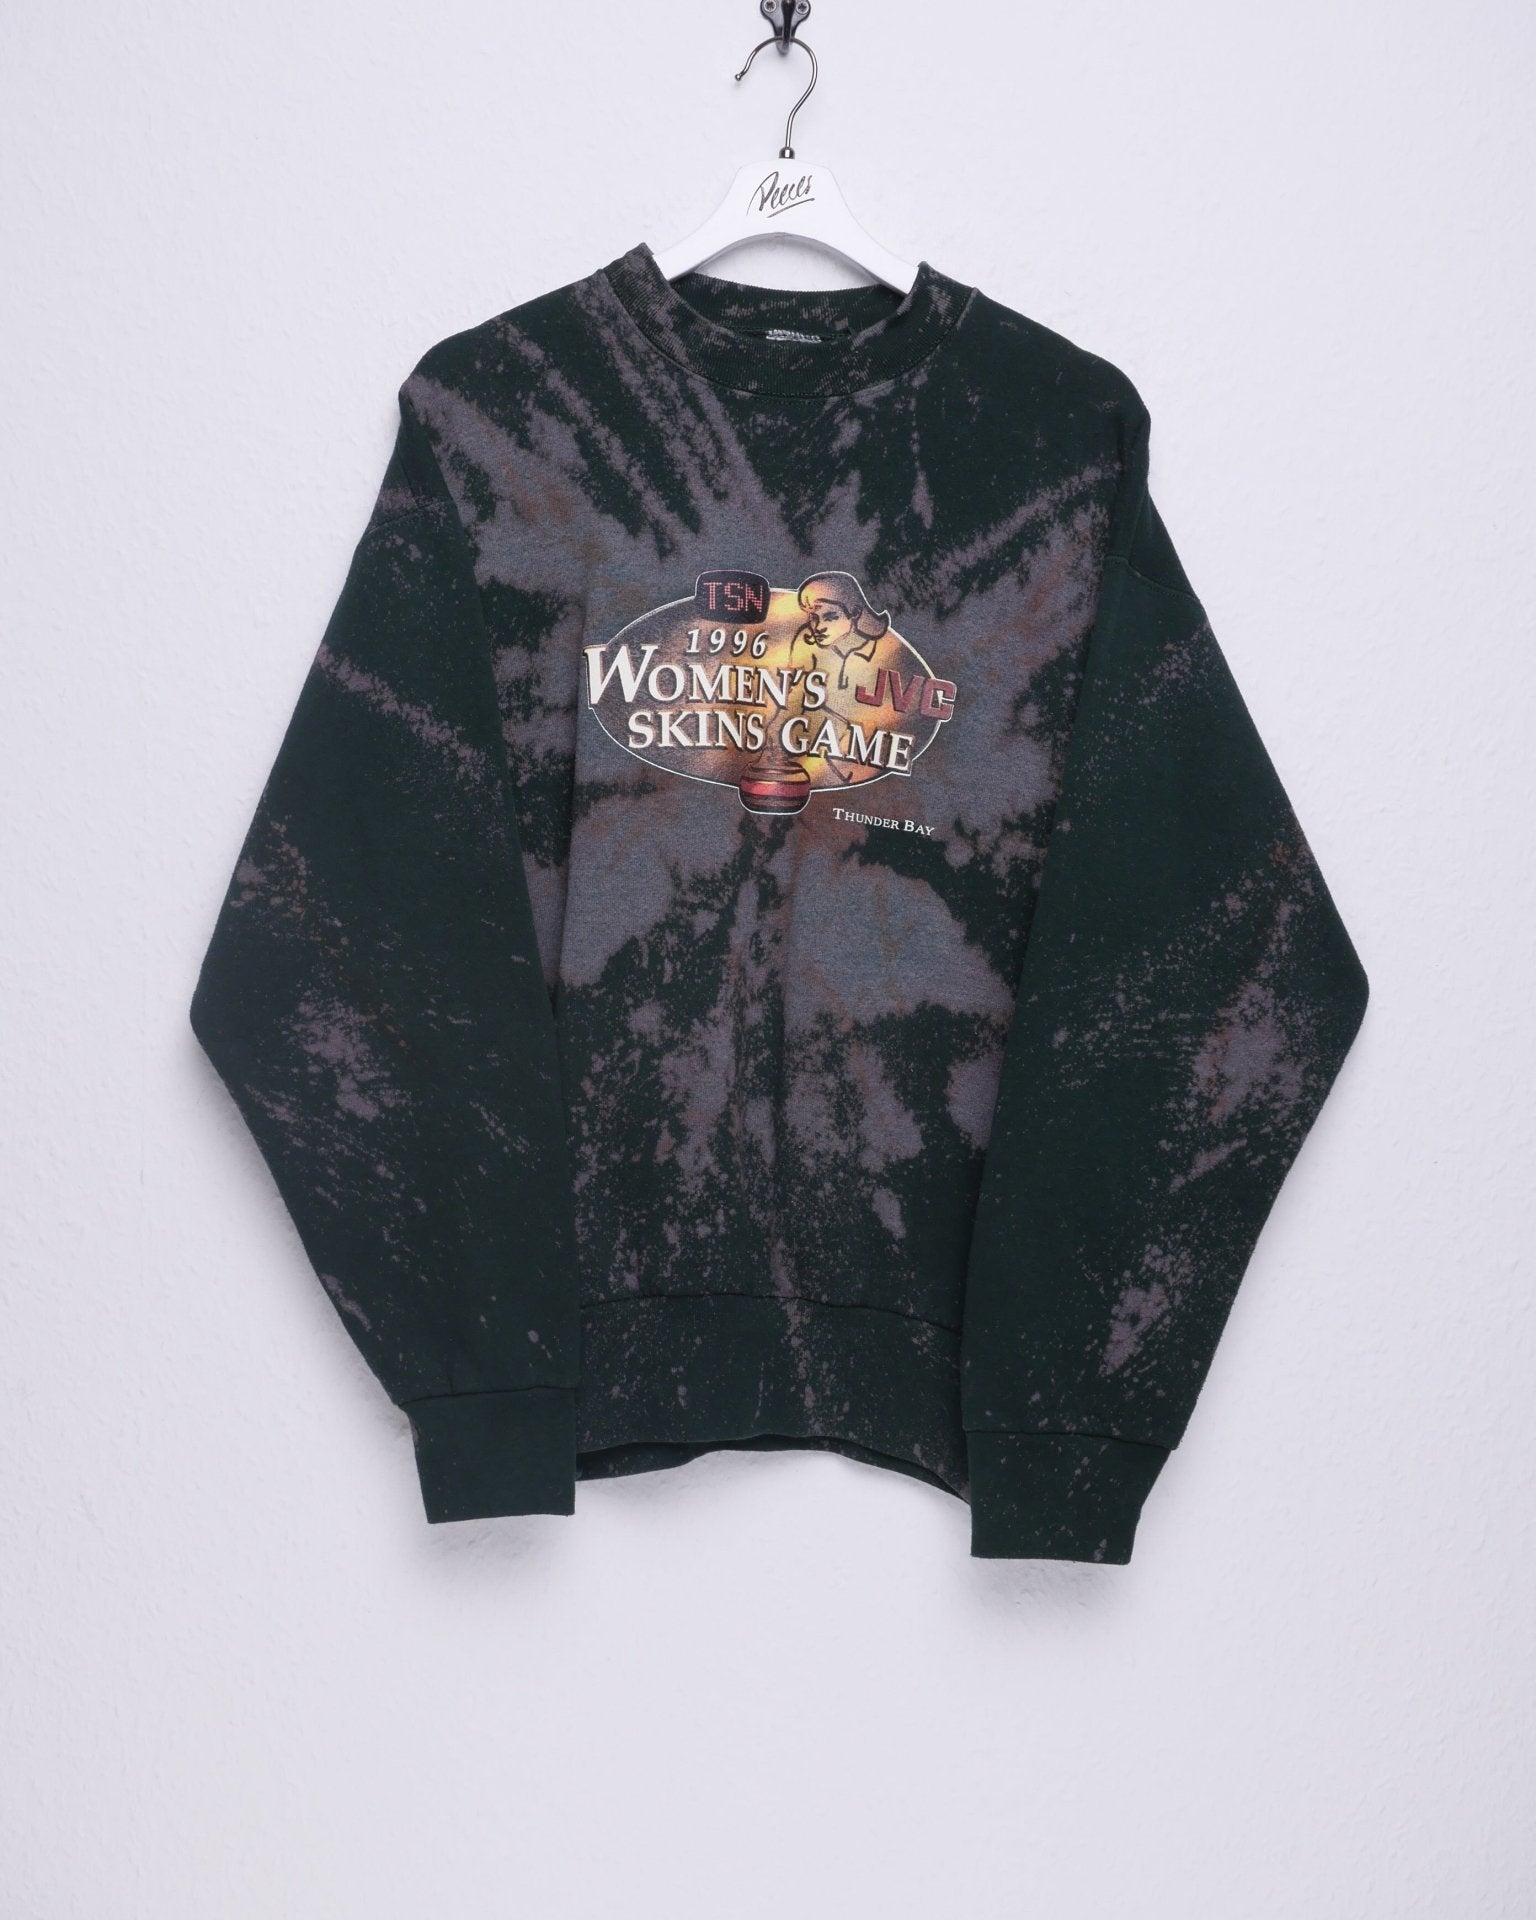 Women's Skins Game 1996 printed Logo bleached Sweater - Peeces